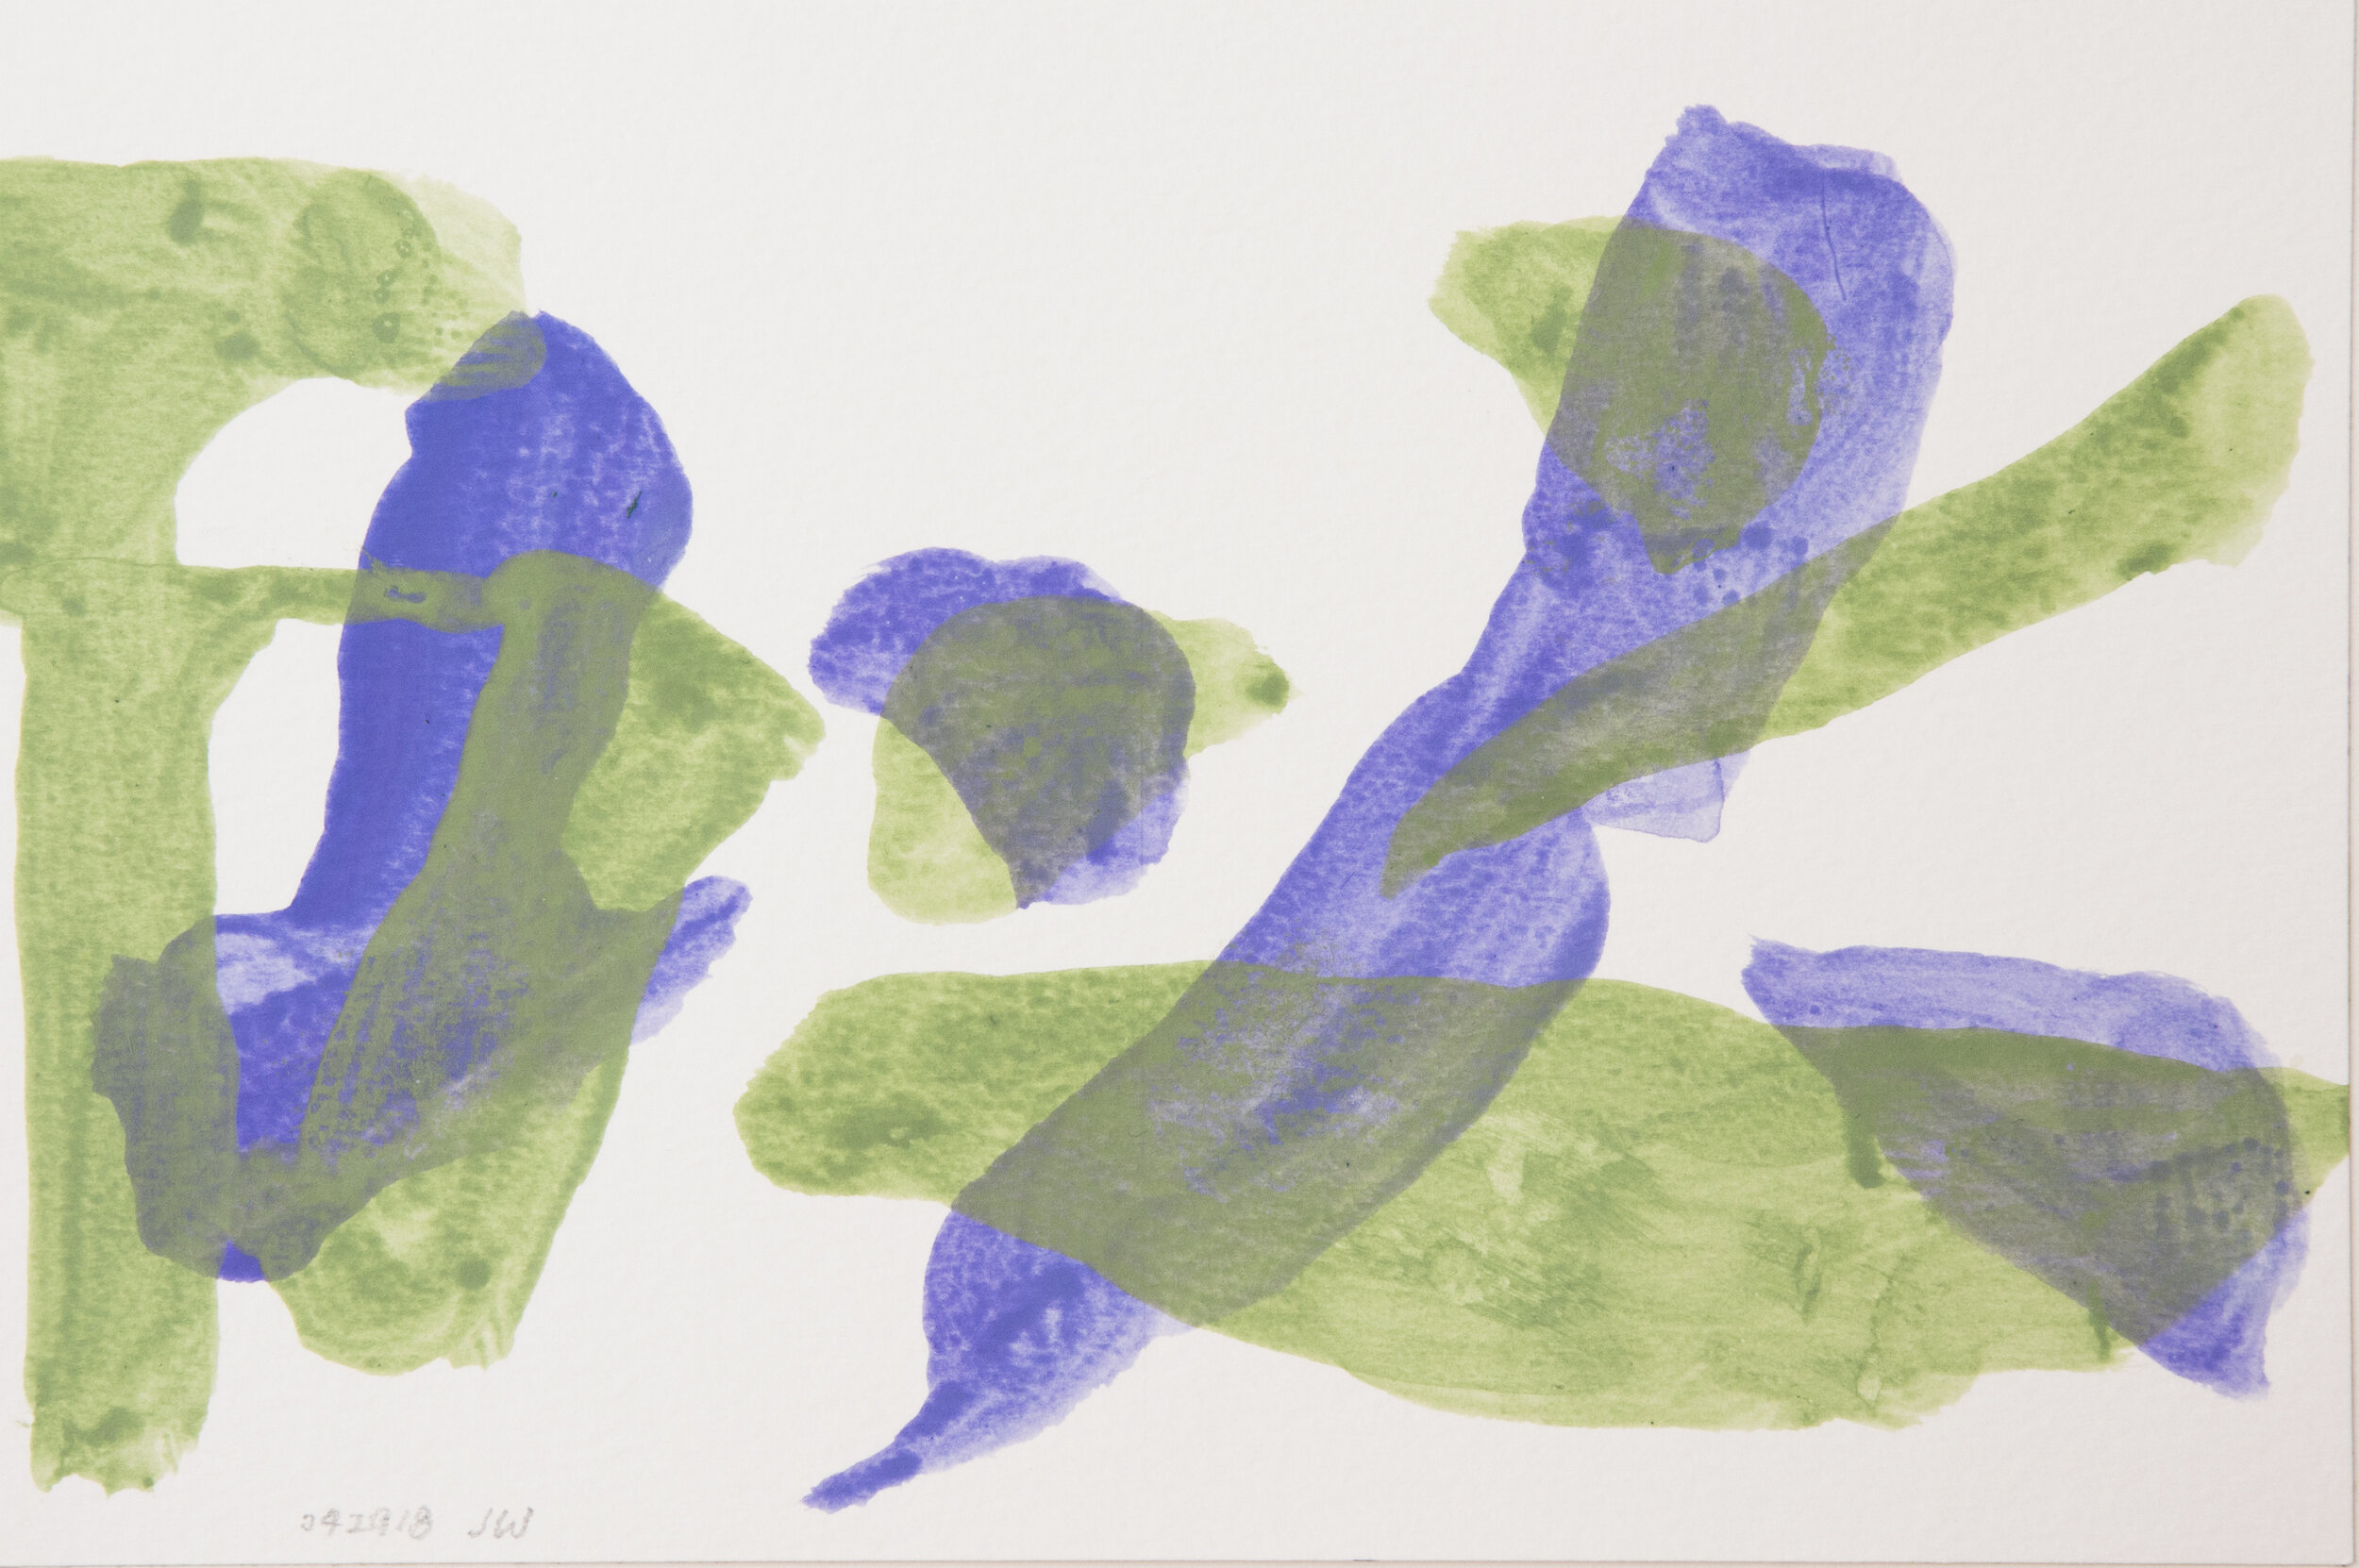  Wei Jia,  S 042918 , 2018. Ink and gouache on paper, 6 x 9 inches ©Wei Jia, courtesy Fou Gallery   